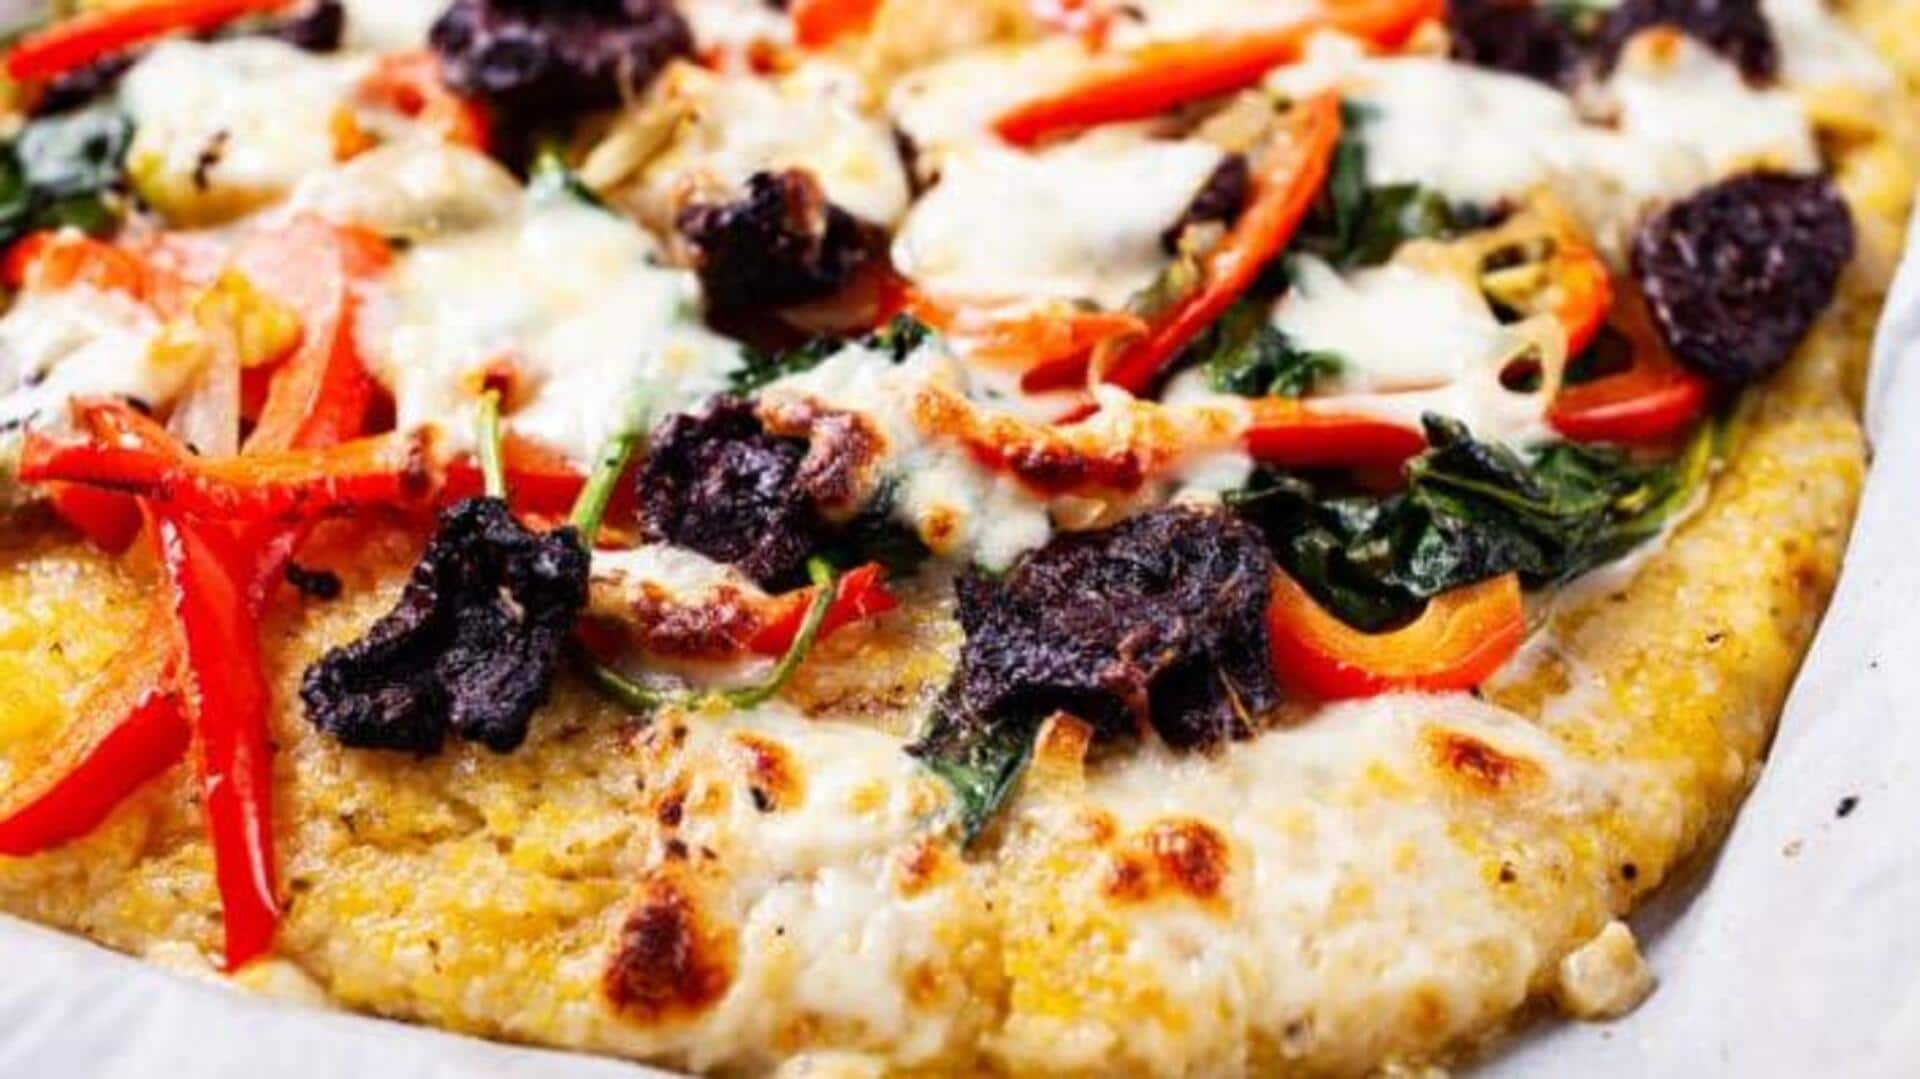 Make Italian polenta pizza at home with this recipe